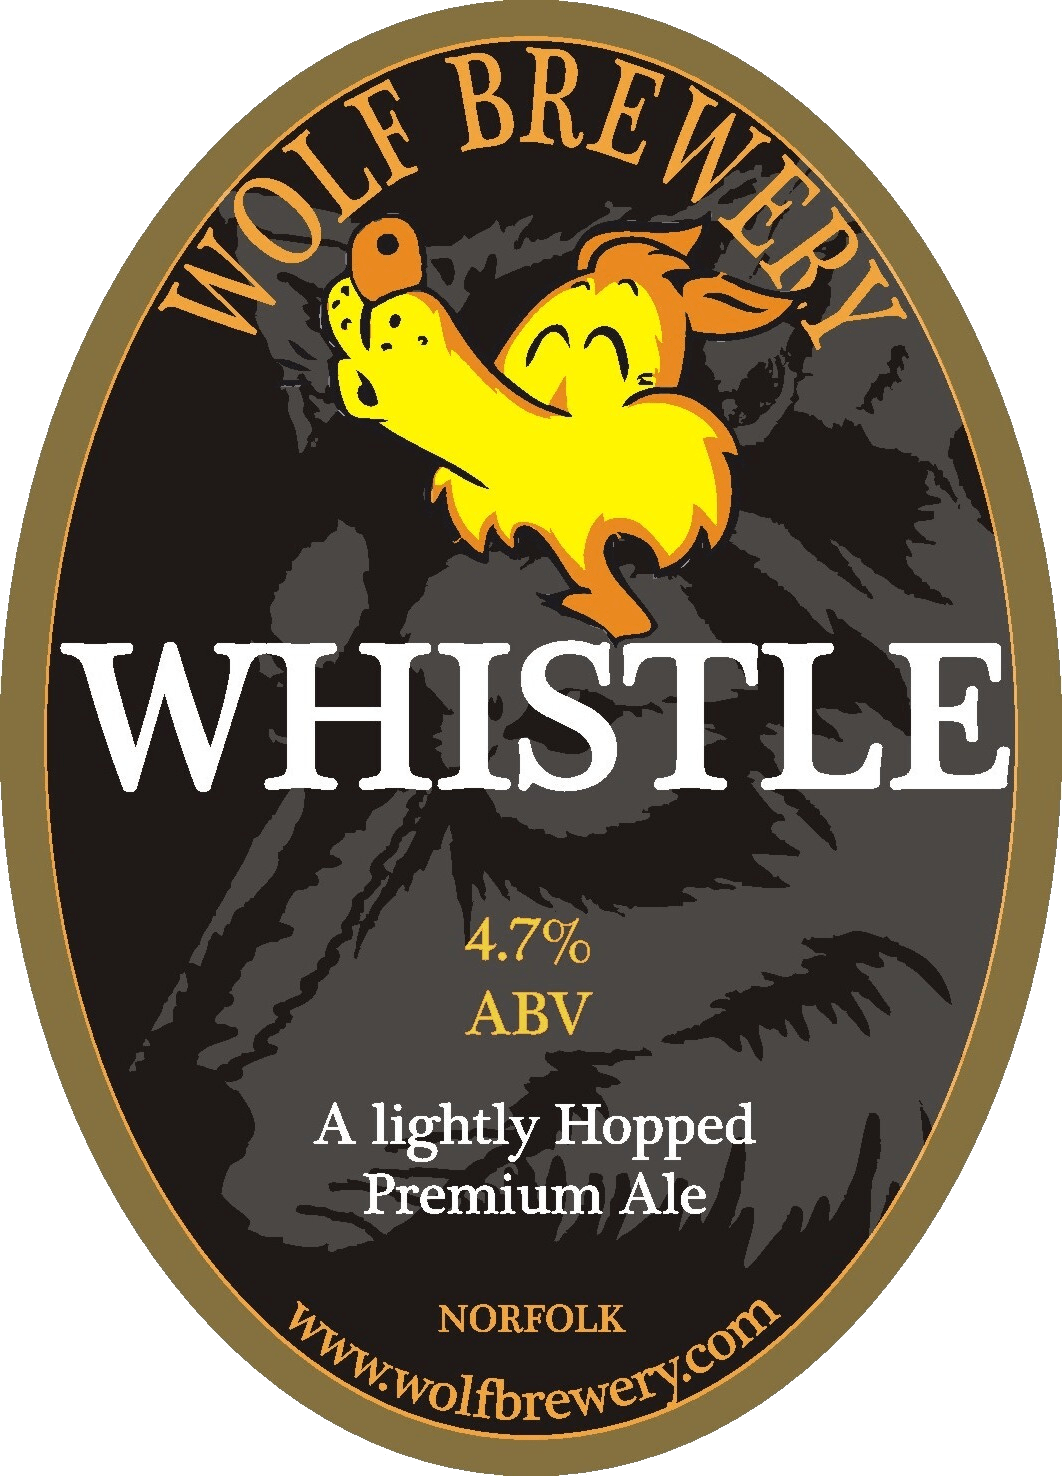 Whistle beer